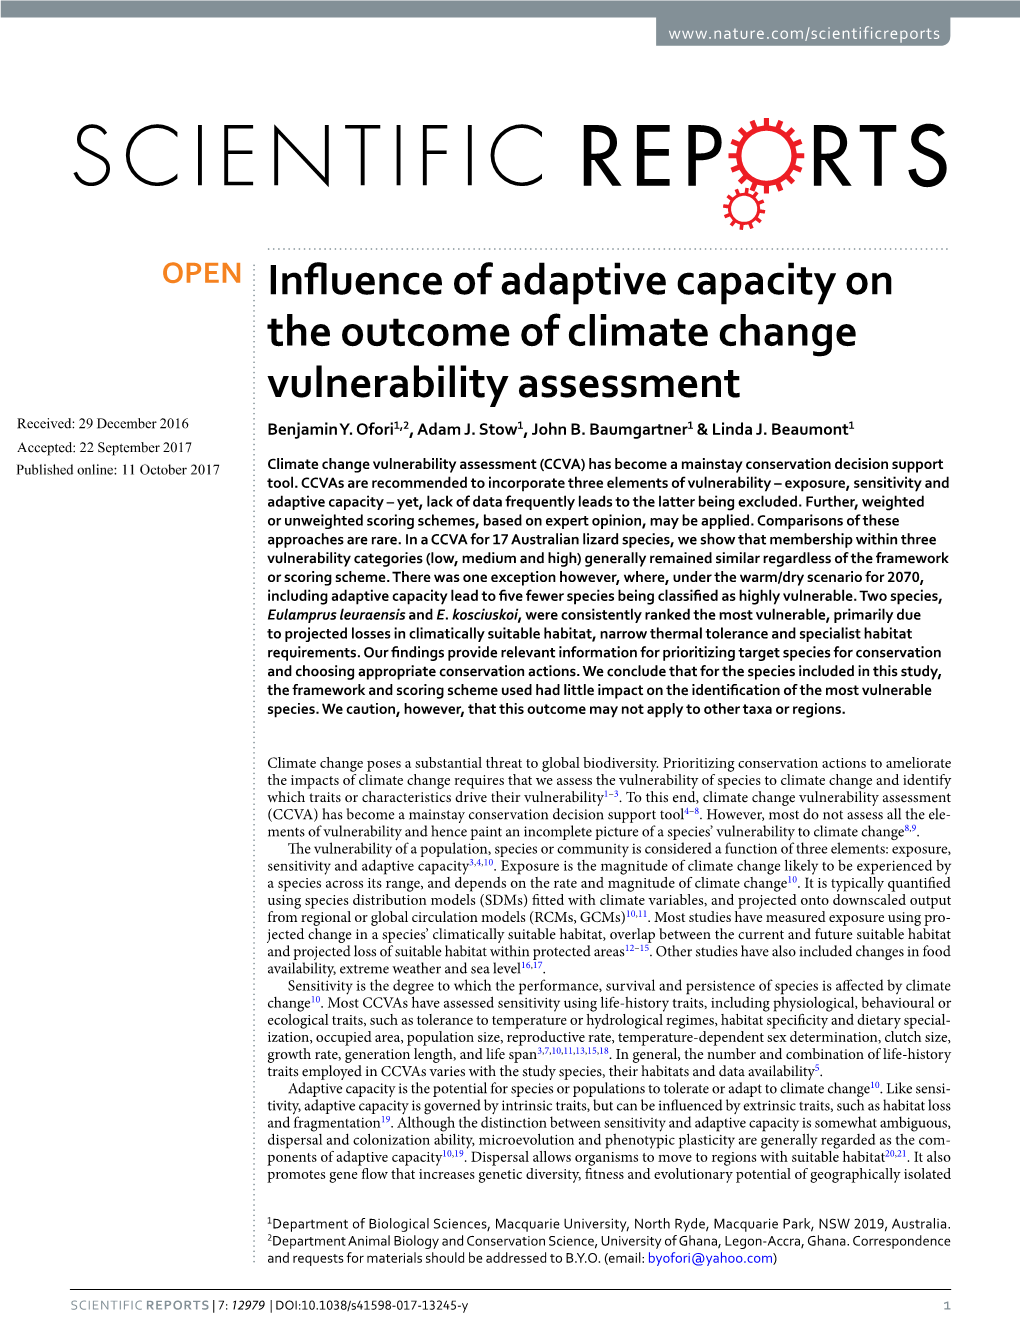 Influence of Adaptive Capacity on the Outcome Of